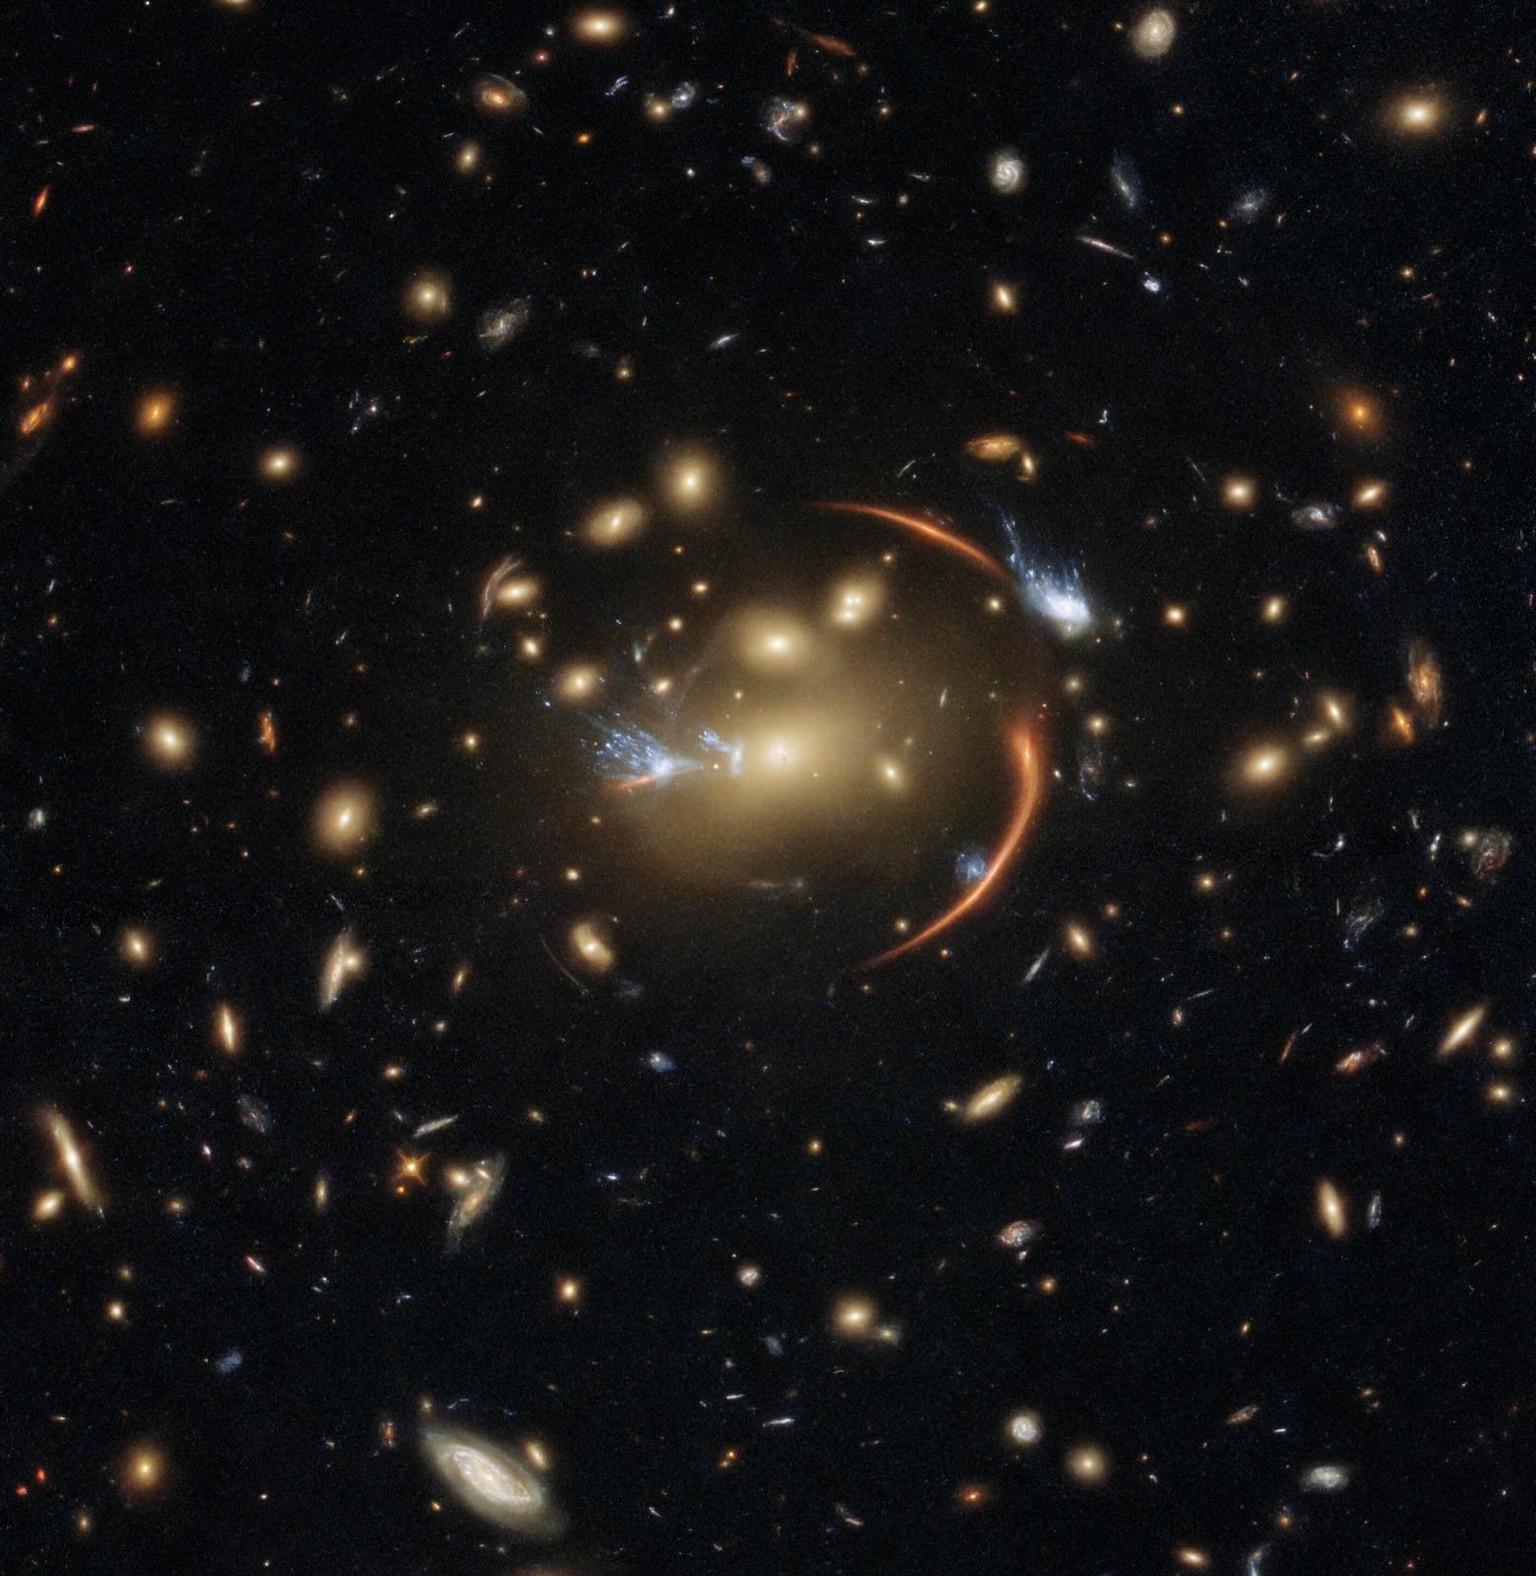 The centre of this image from the NASA/ESA Hubble Space Telescope is framed by the tell-tale arcs that result from strong gravitational lensing, a striking astronomical phenomenon which can warp, magn ...